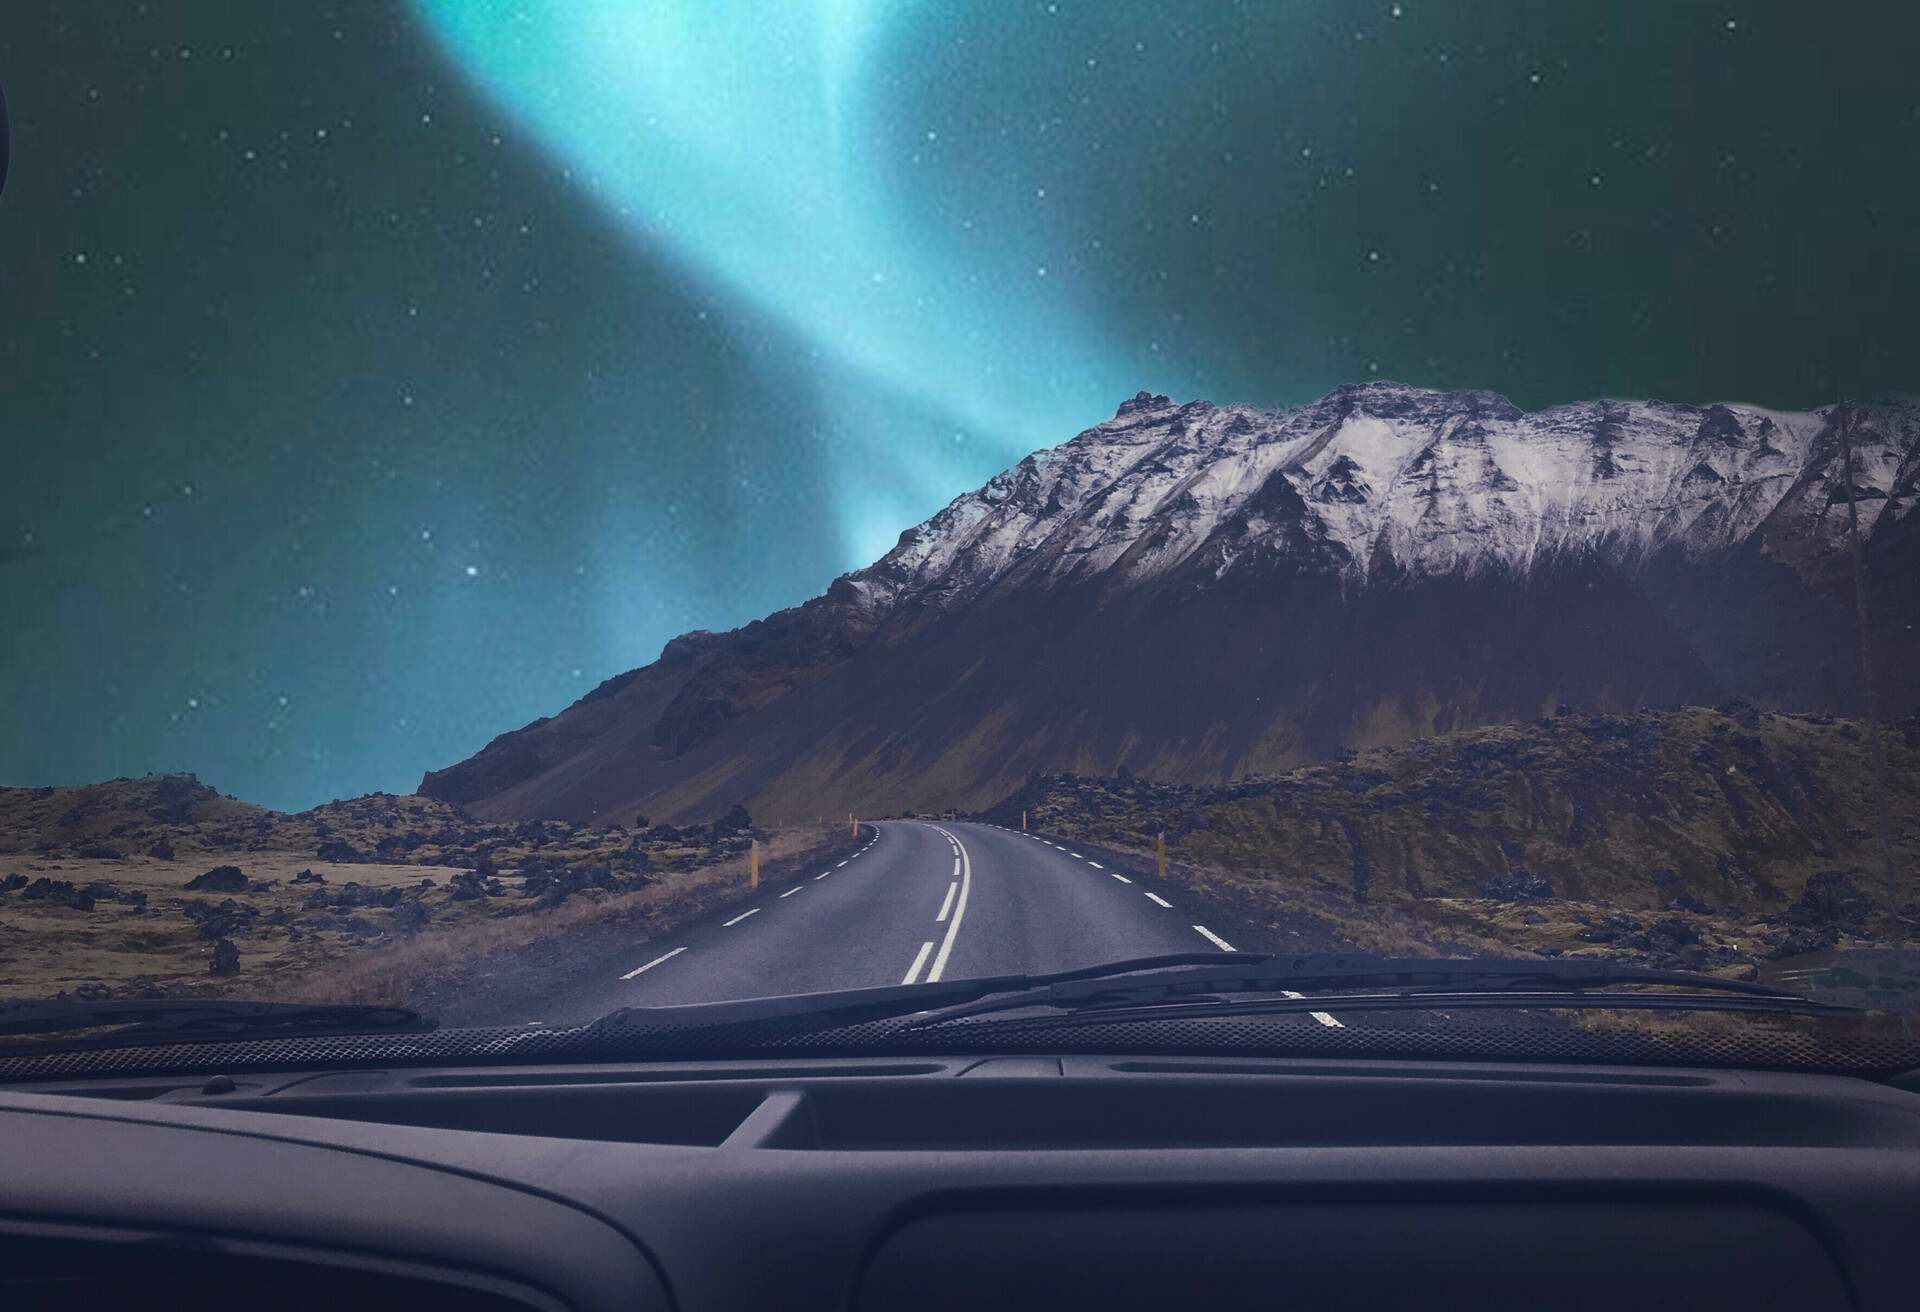 A car driving down the road as the northern lights swirl around a snow-capped mountain in the distance.